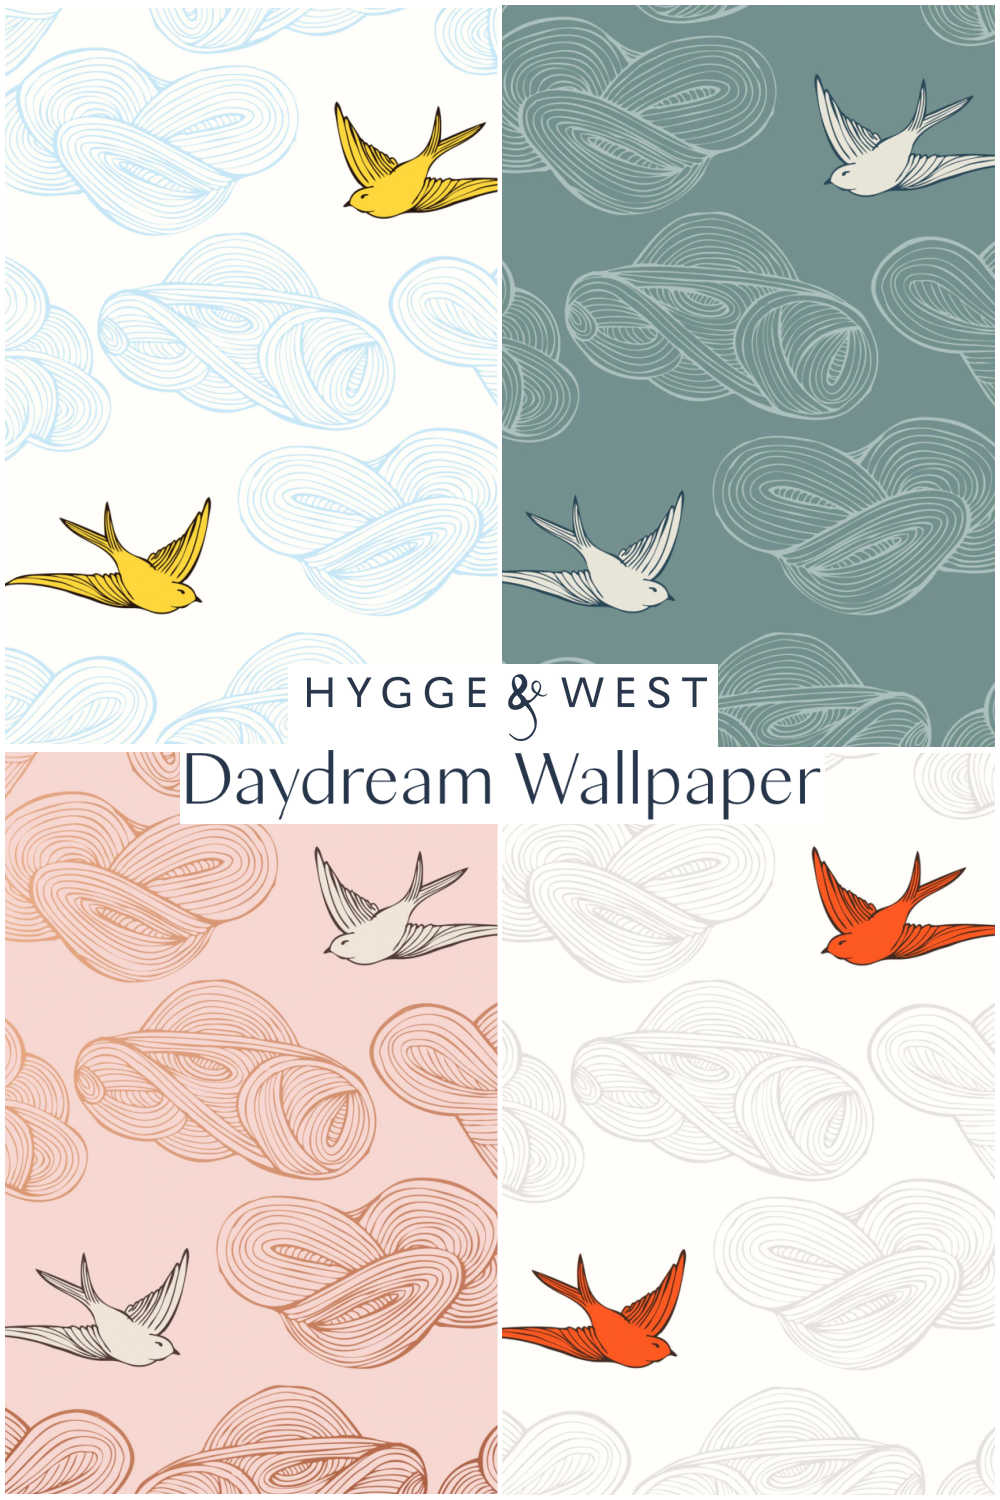 Hygge and West Daydream Wallpaper 